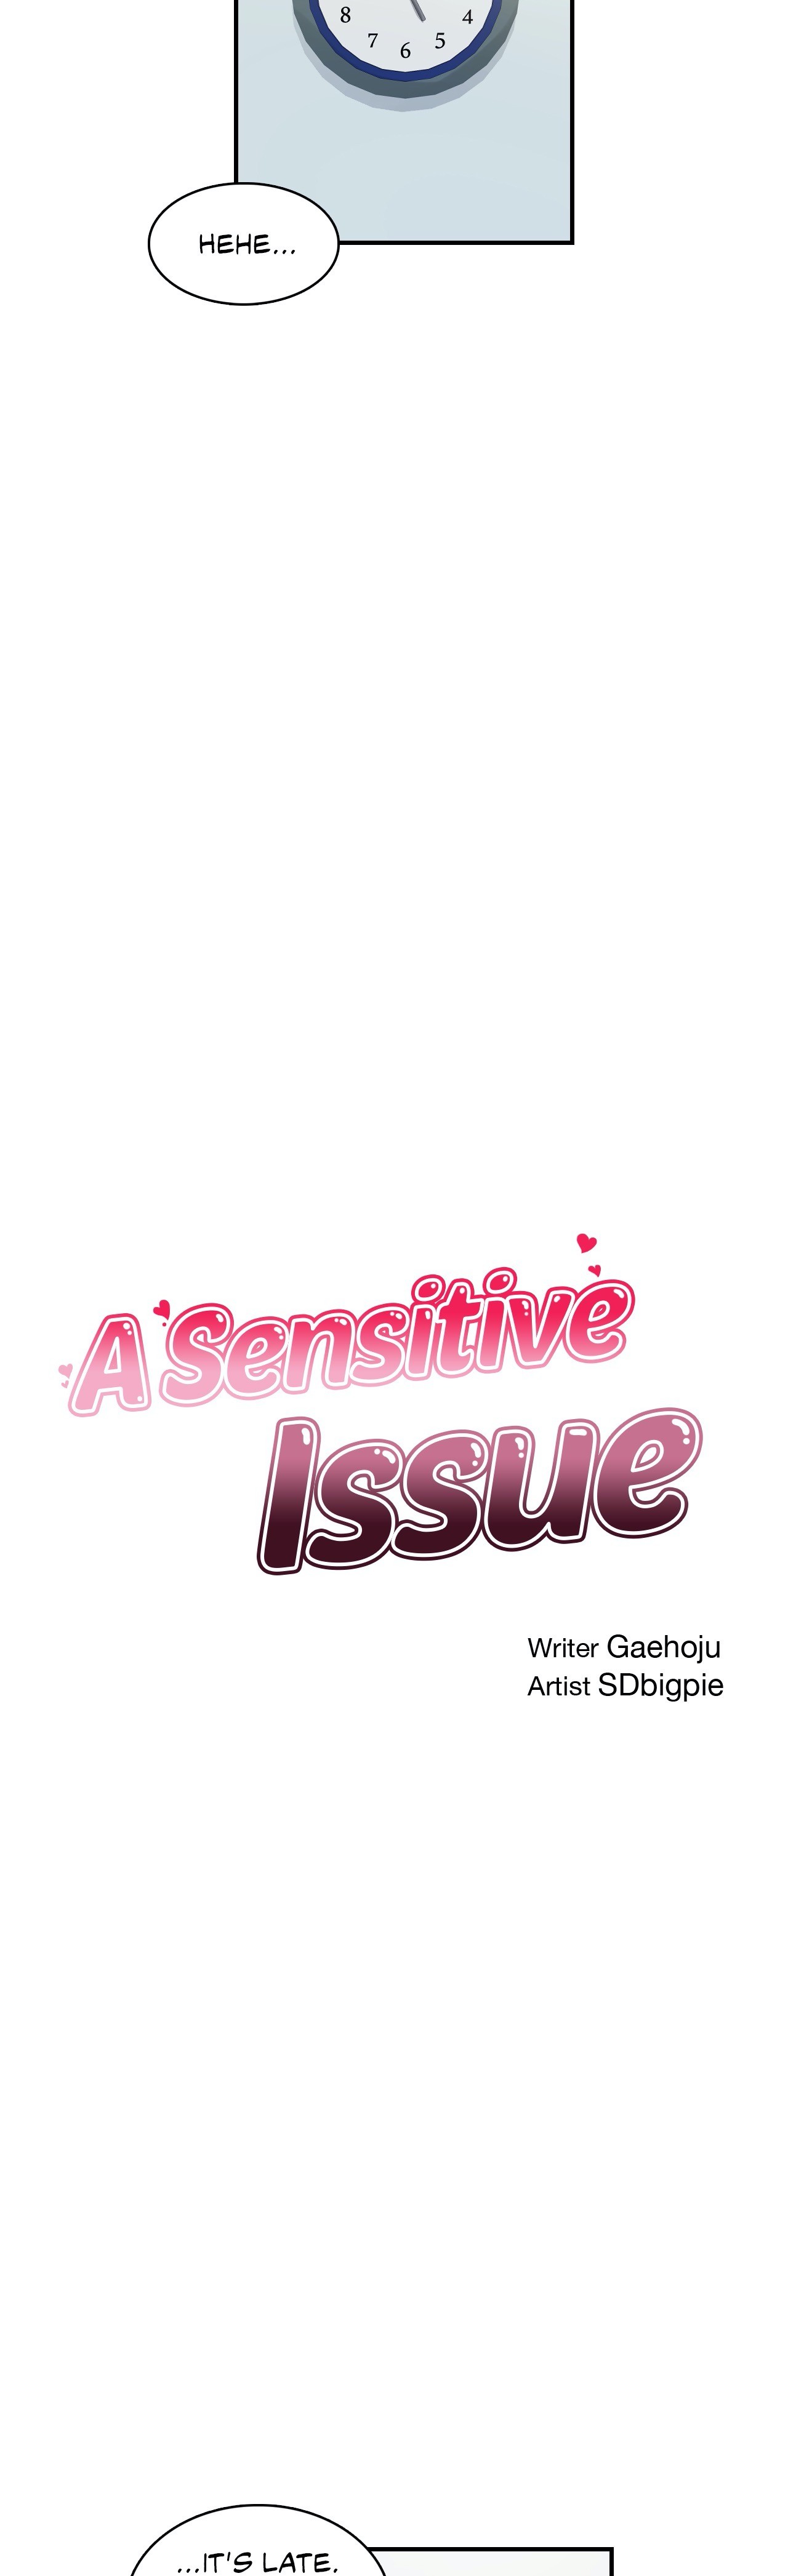 A Sensitive Issue image